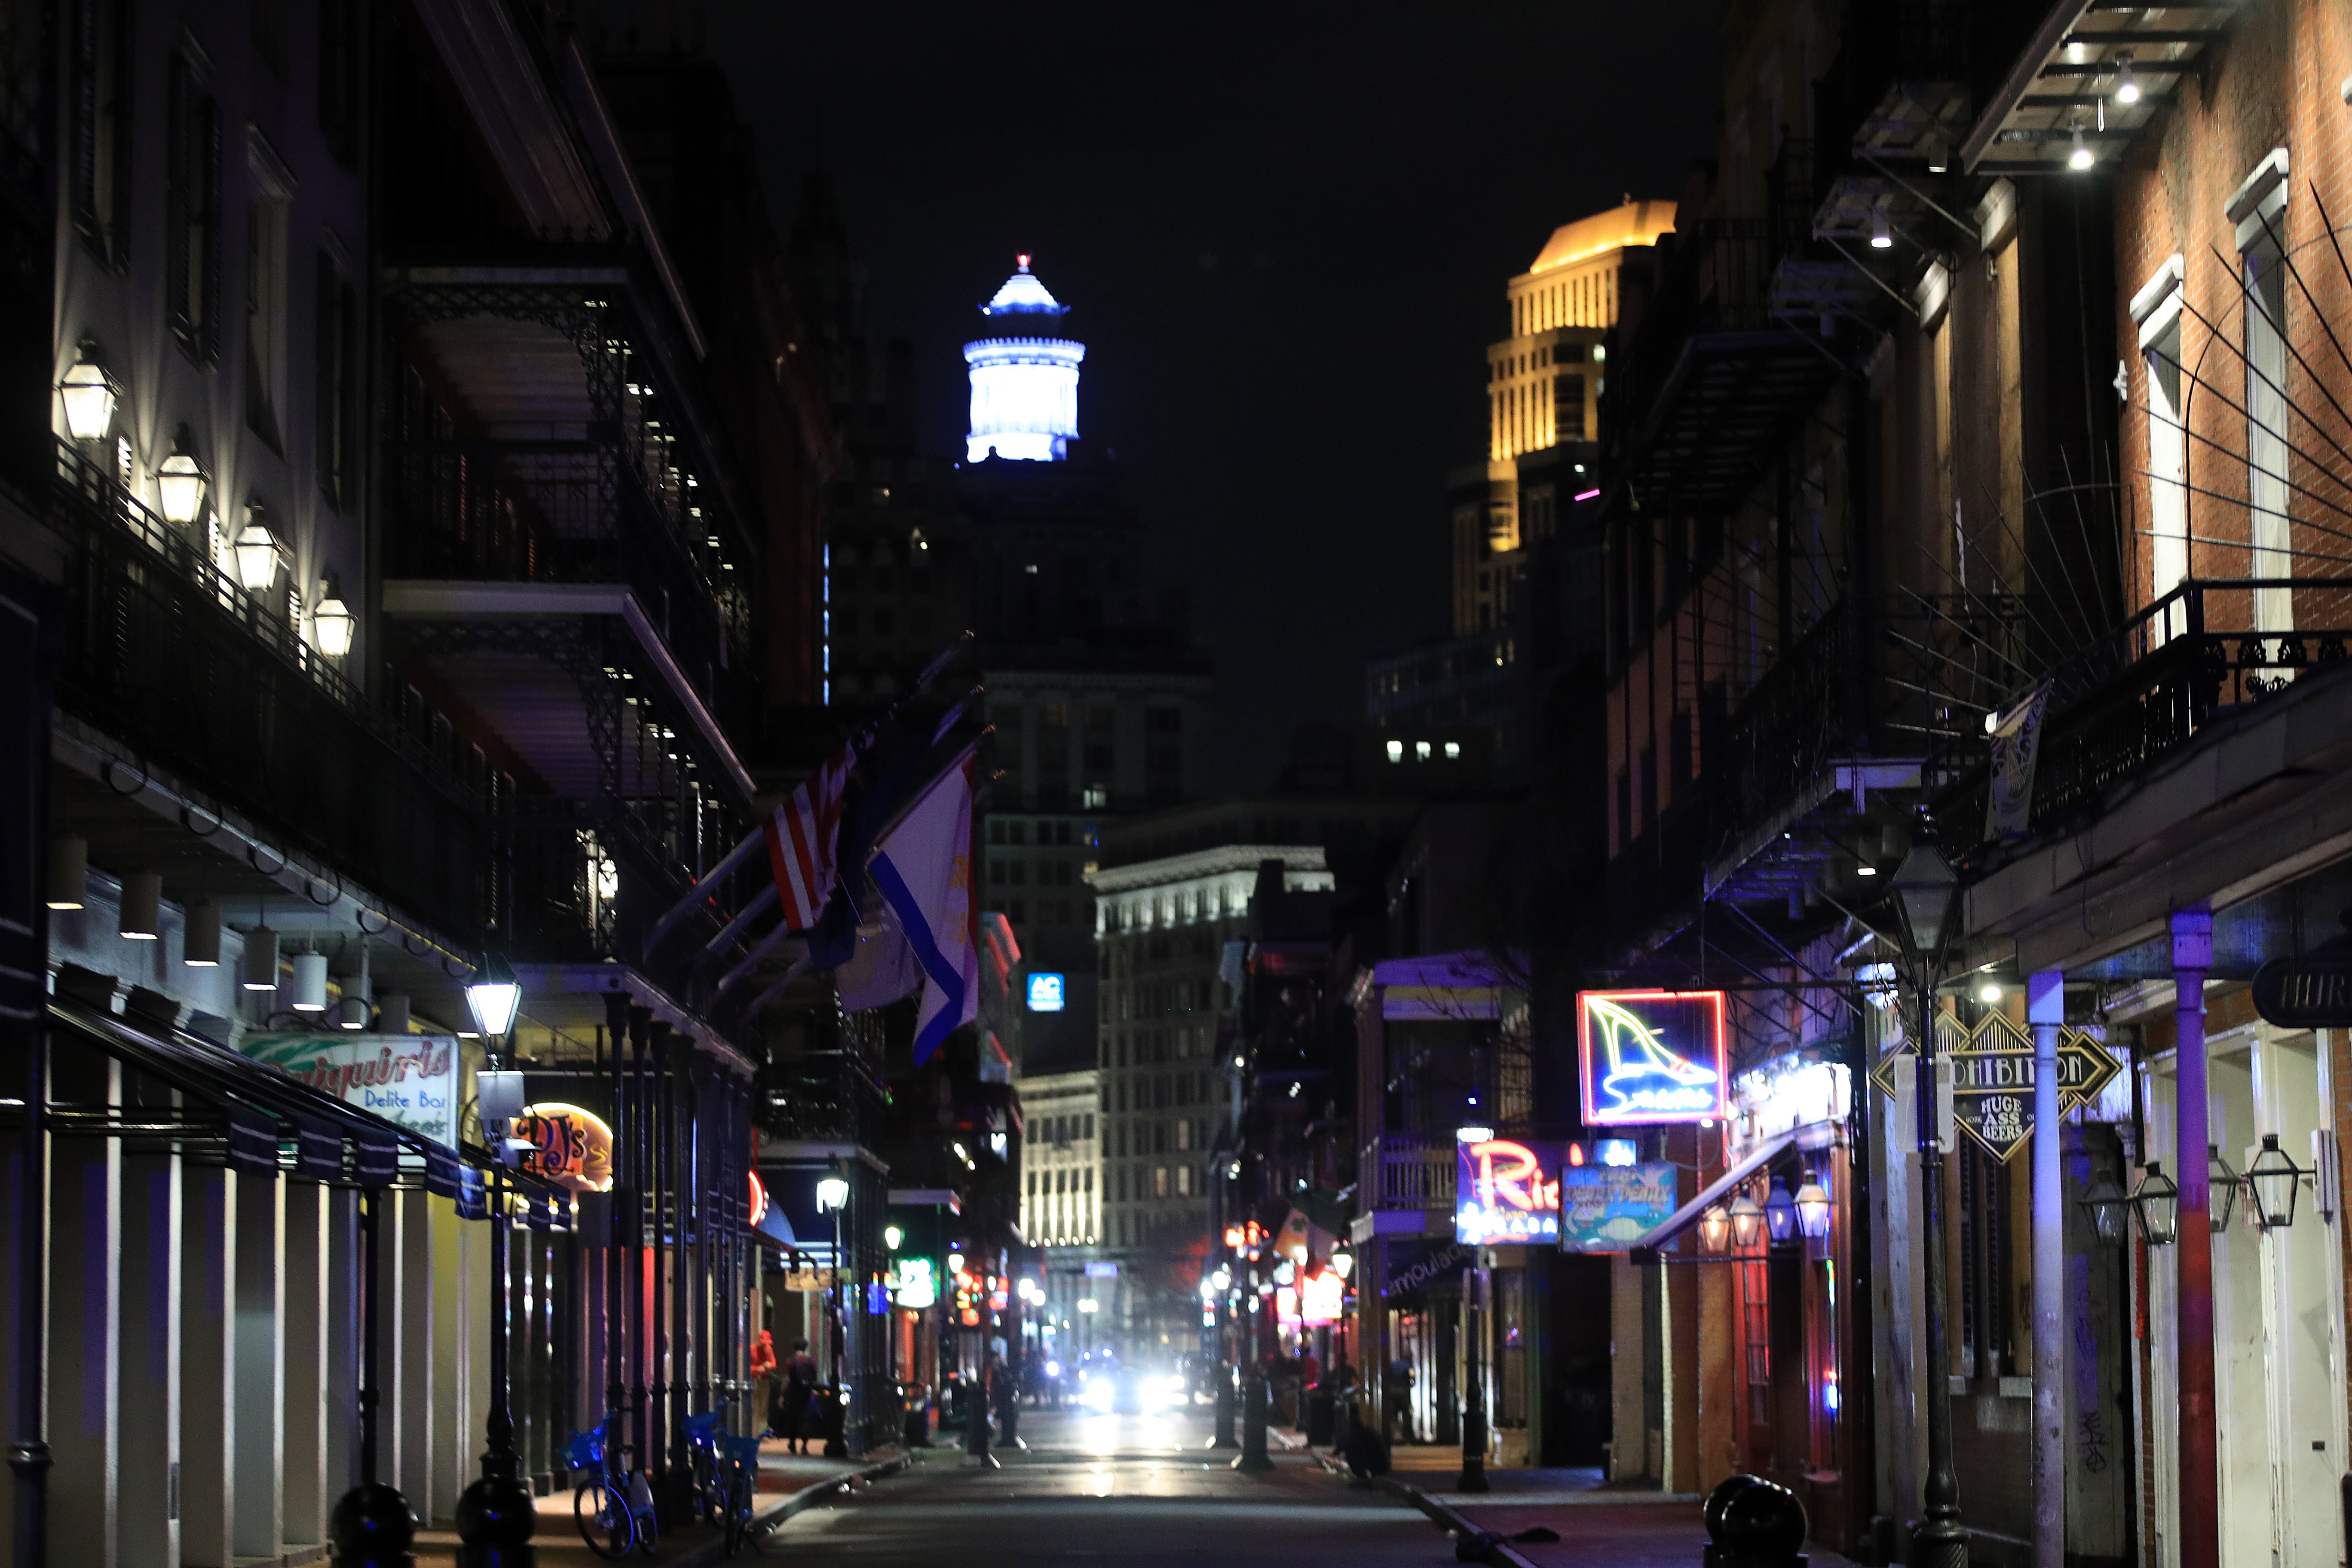 Bourbon Street is empty as Louisiana Governor John Bel Edwards orders bars, gyms and casinos to close until April 13th due to the spread of coronavirus (COVID-19) on March 16, 2020 in New Orleans, Louisiana